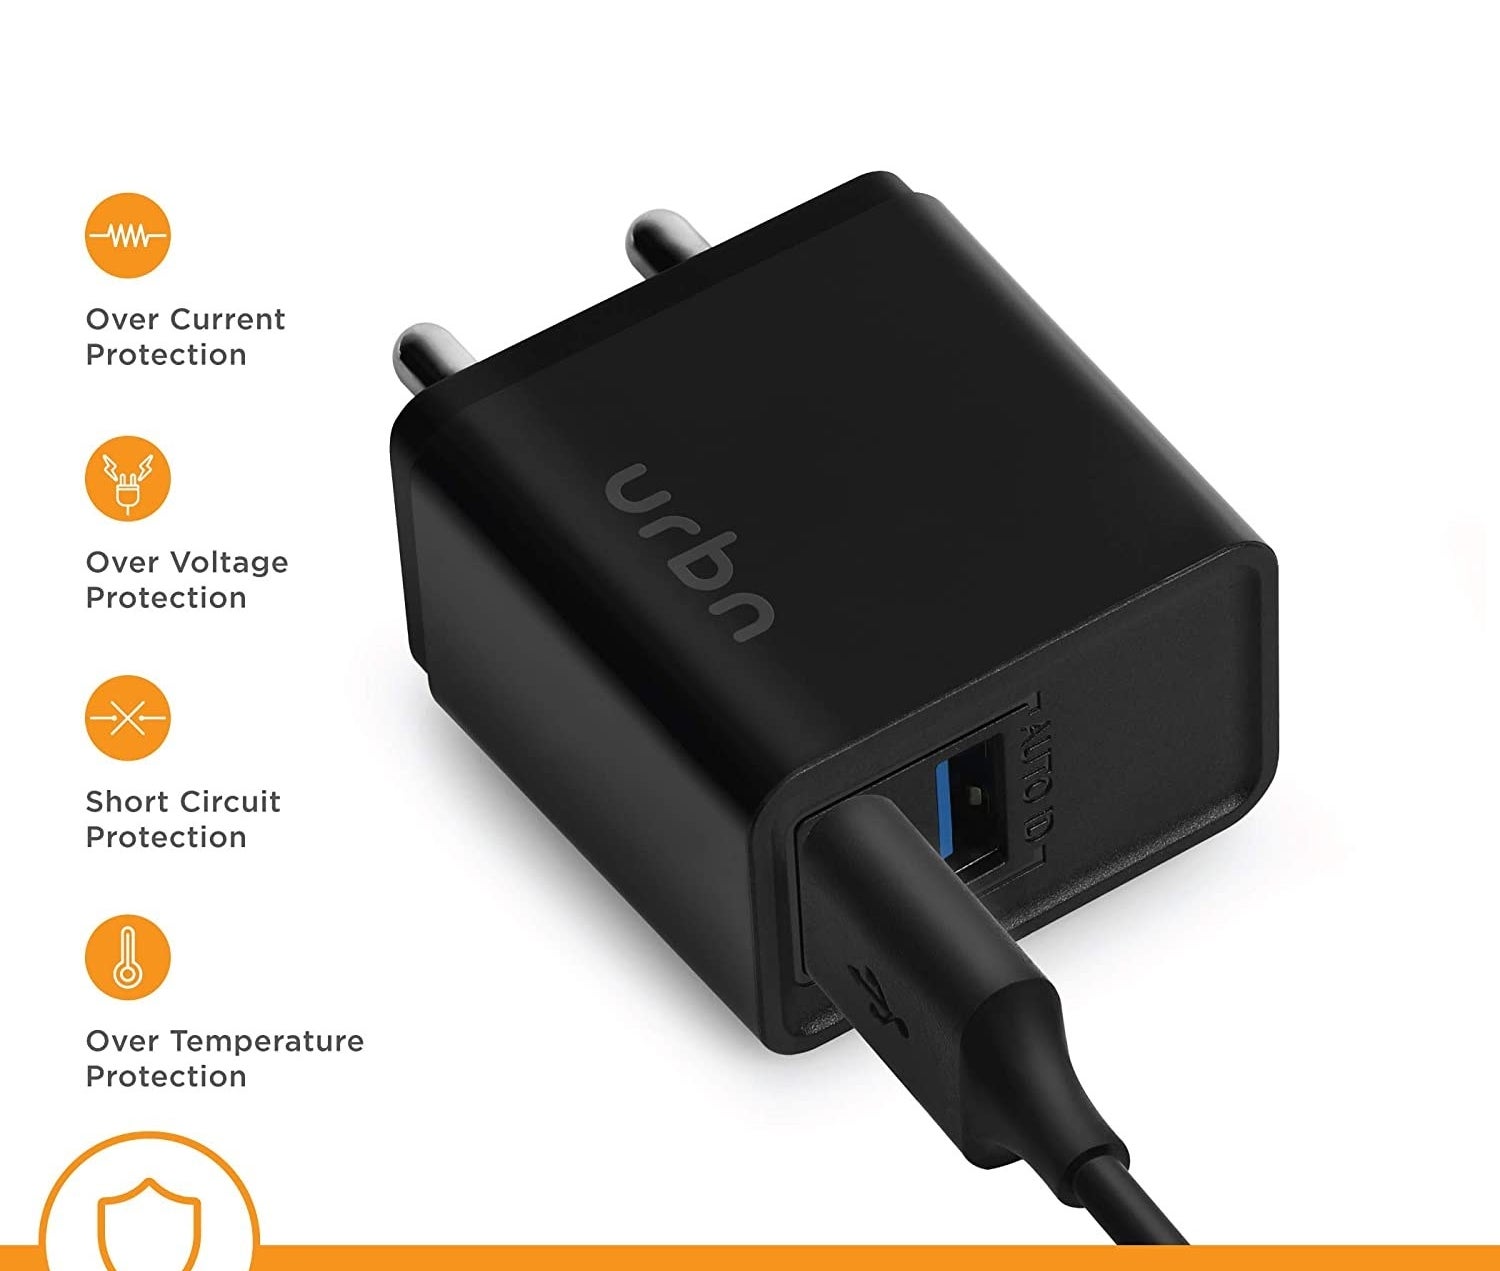 The fast charger with its features listed such as over voltage protection and over temperature protection